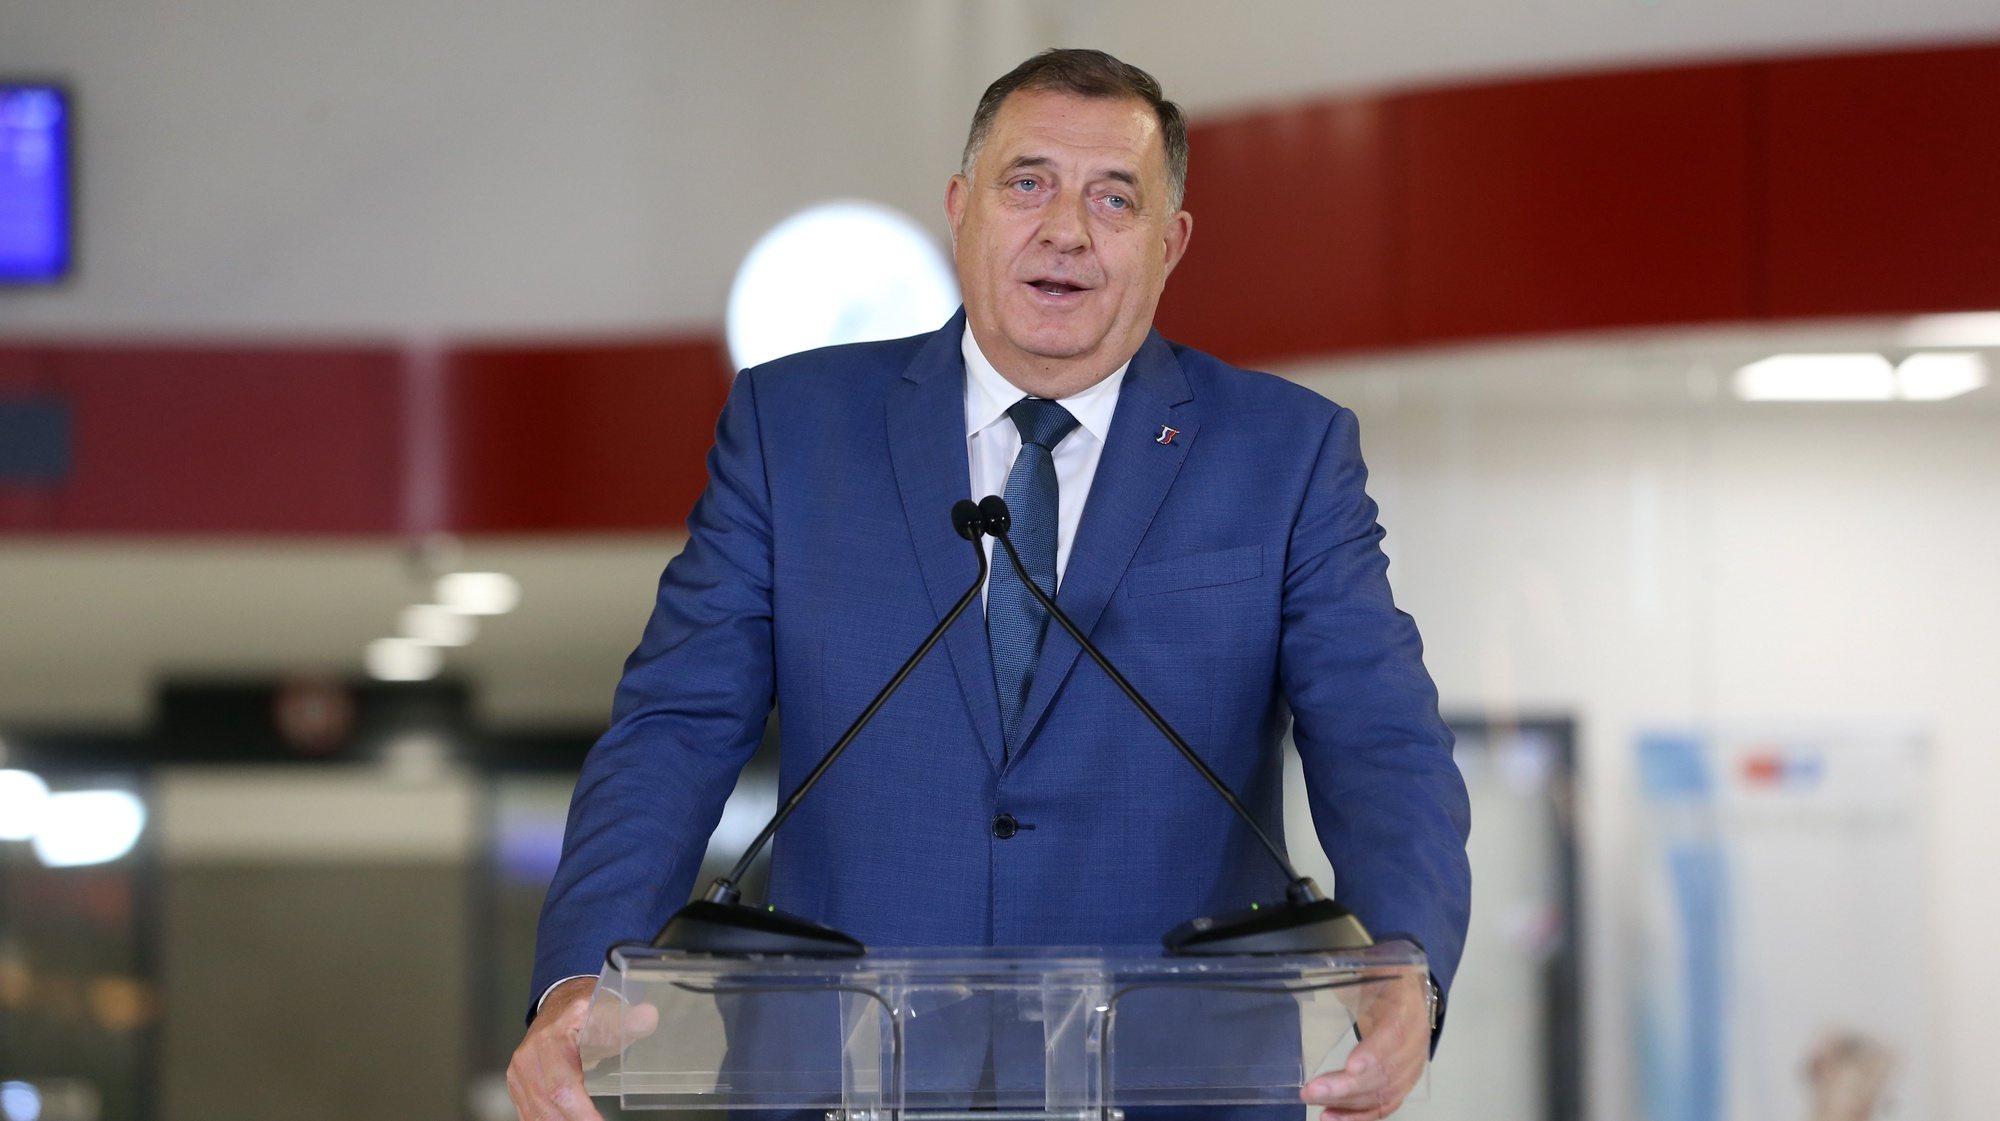 epa10929559 President of the Republic of Srpska Milorad Dodik speaks during the opening ceremony of the Belgrade Main train station in Belgrade, Serbia, 20 October 2023. The opening completes the second phase of the construction of the railway station that was partly opened in 2018. The 15.1 million Euro investment laid out at 5600 square meters will be able to serve more routes with ten tracks split across the platforms.  EPA/ANDREJ CUKIC